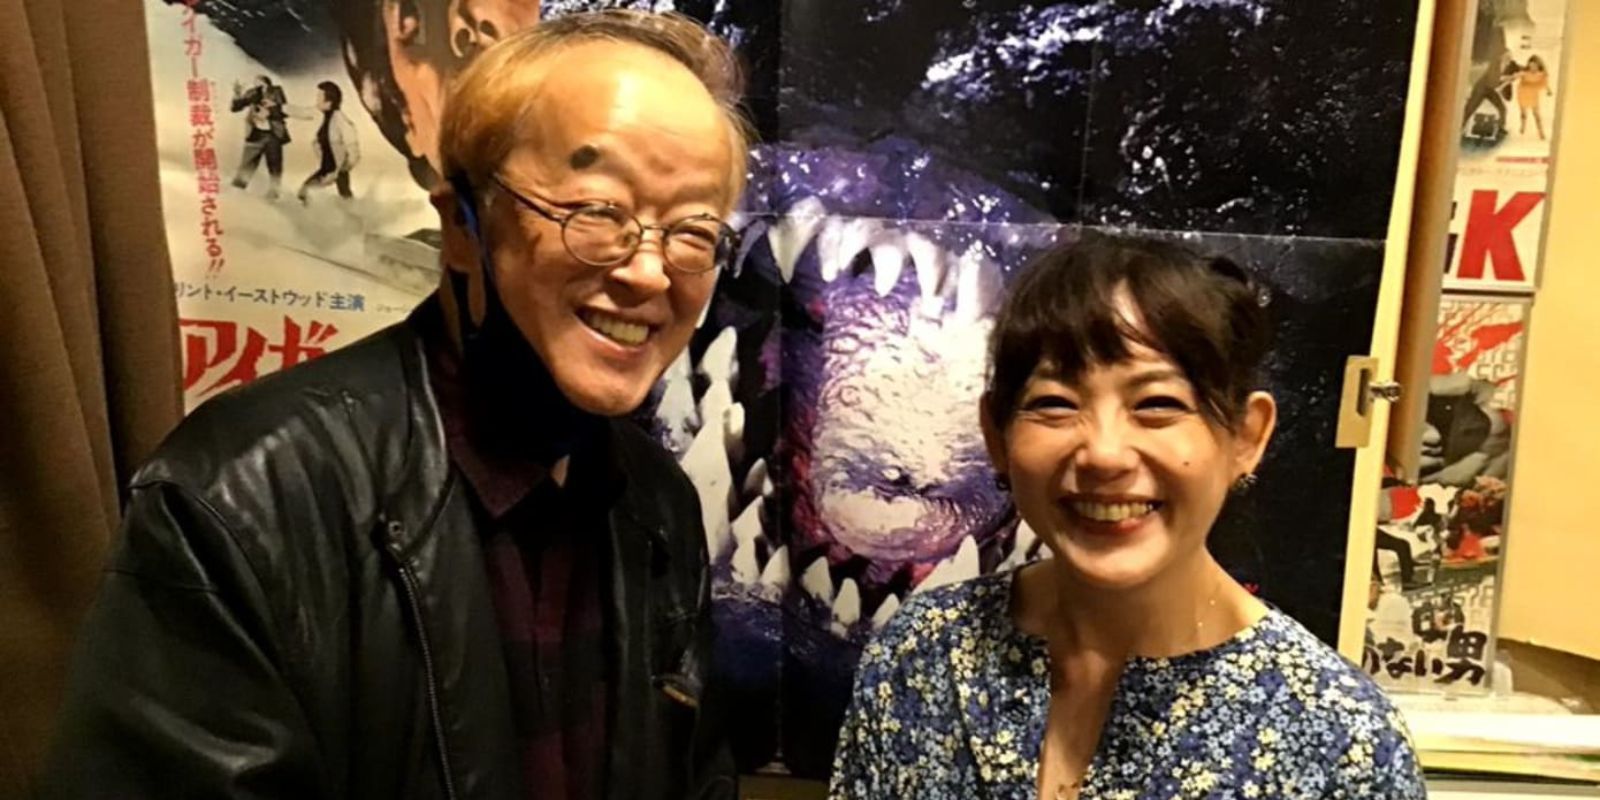 Kazuki Omori standing and smiling in front of a Godzilla poster